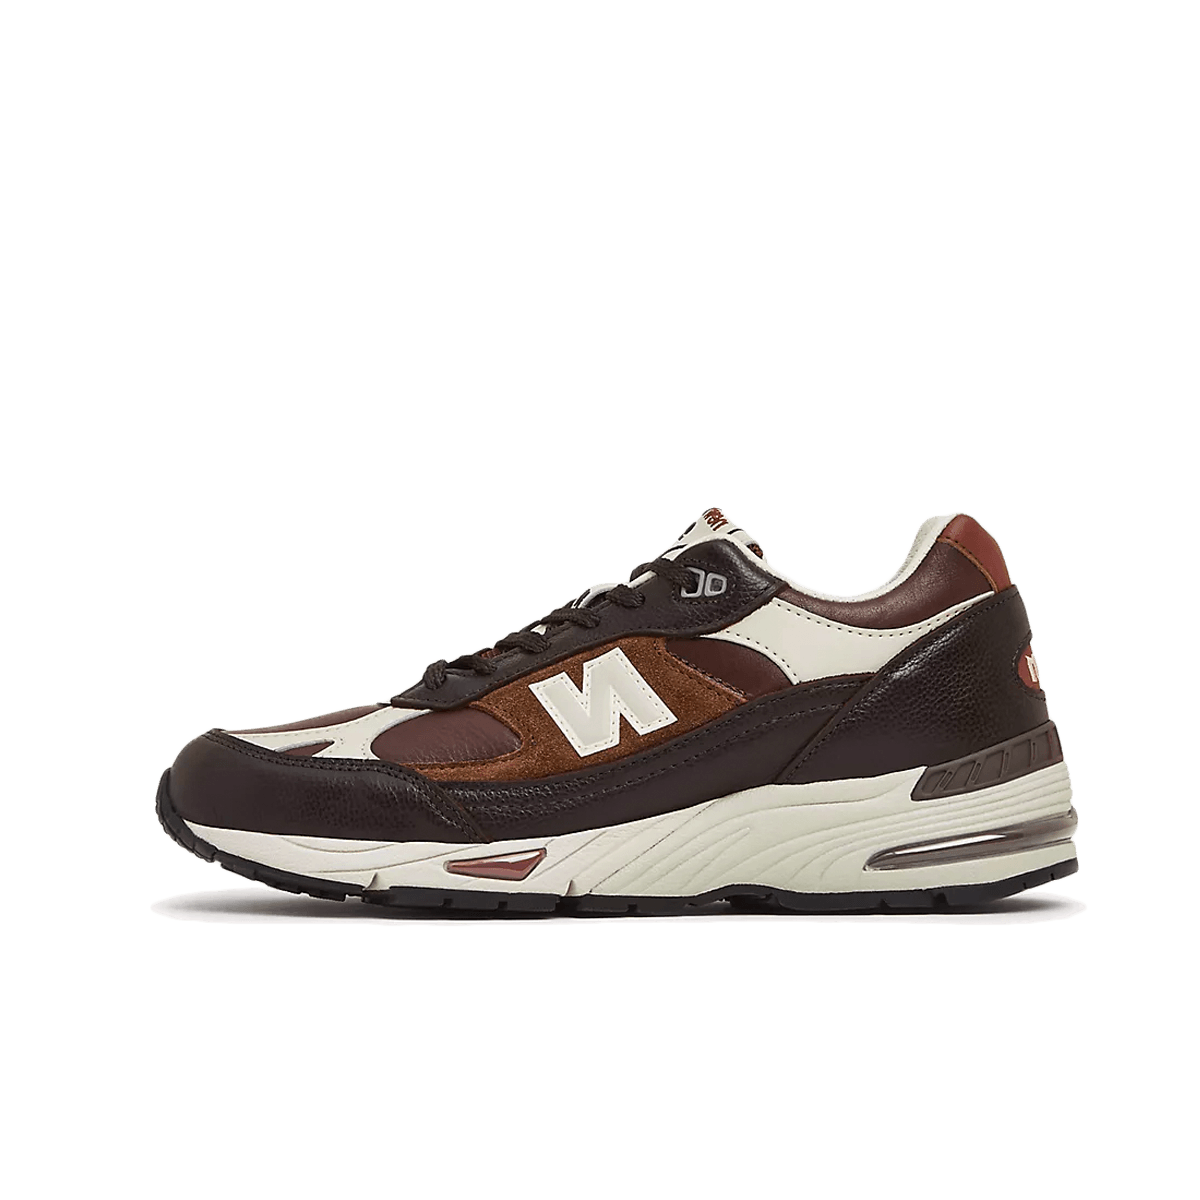 New Balance 991 Made in England 'French Roast'